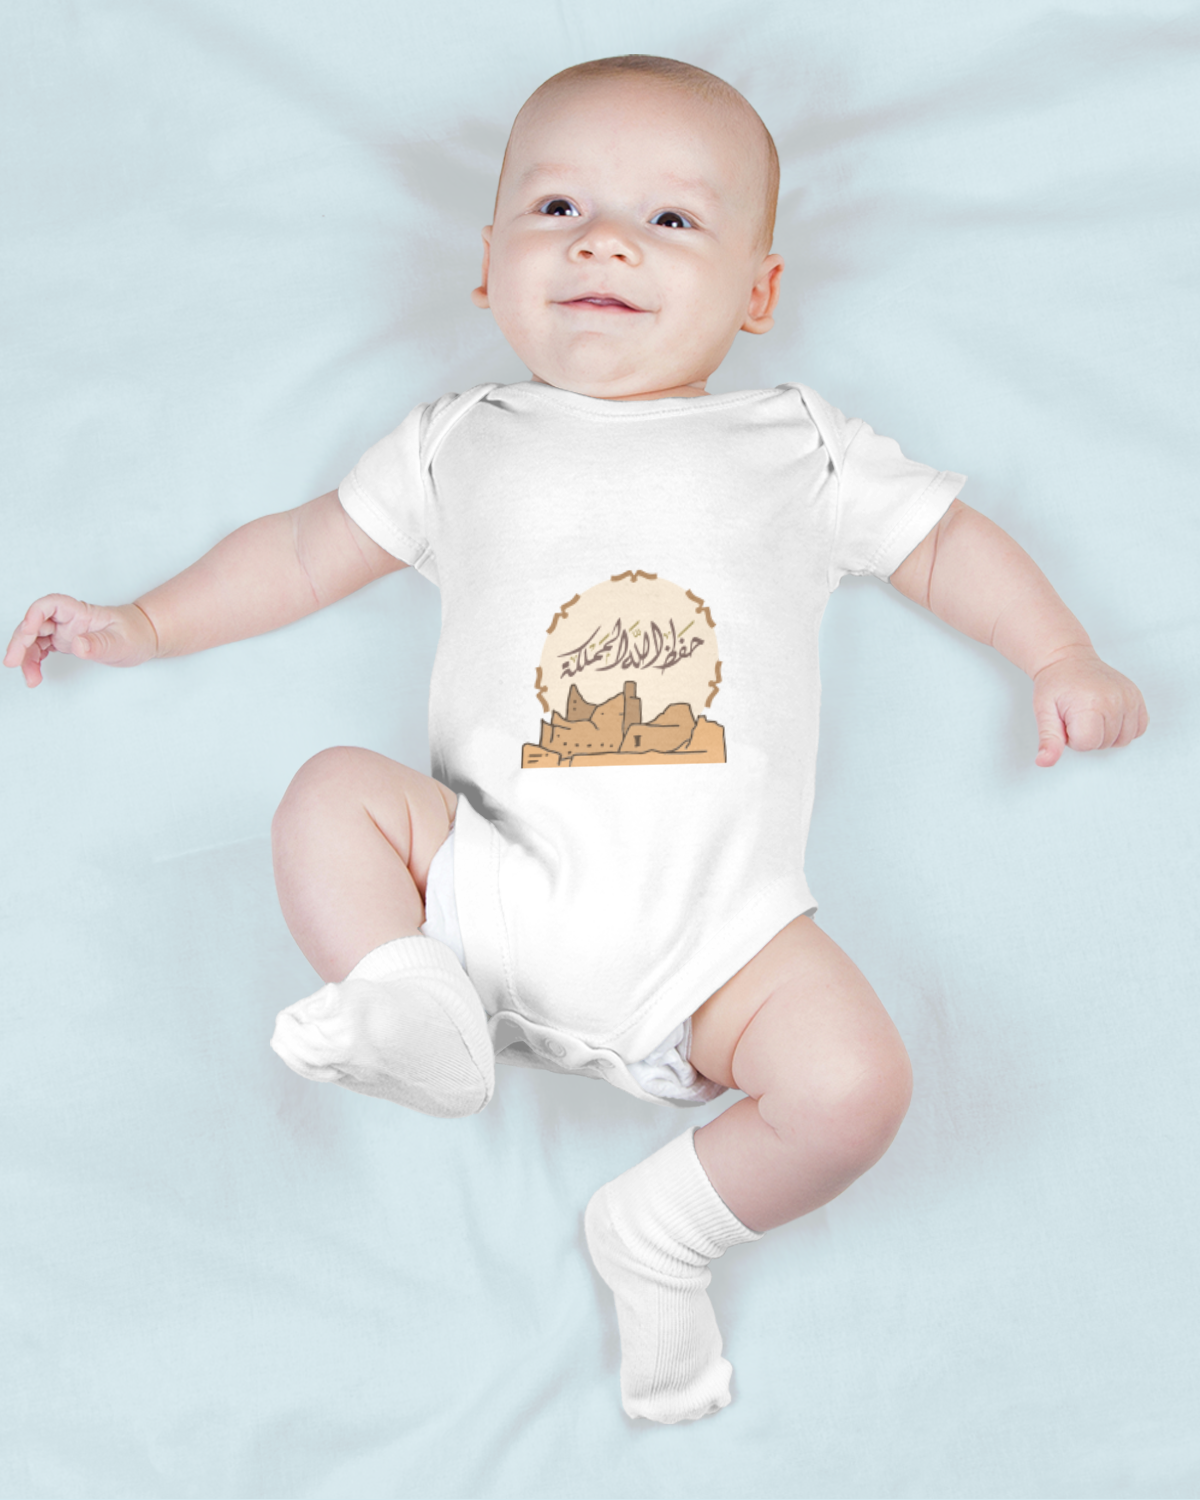 Foundation Day Baby Romper (May Allah Protect the Kingdom)